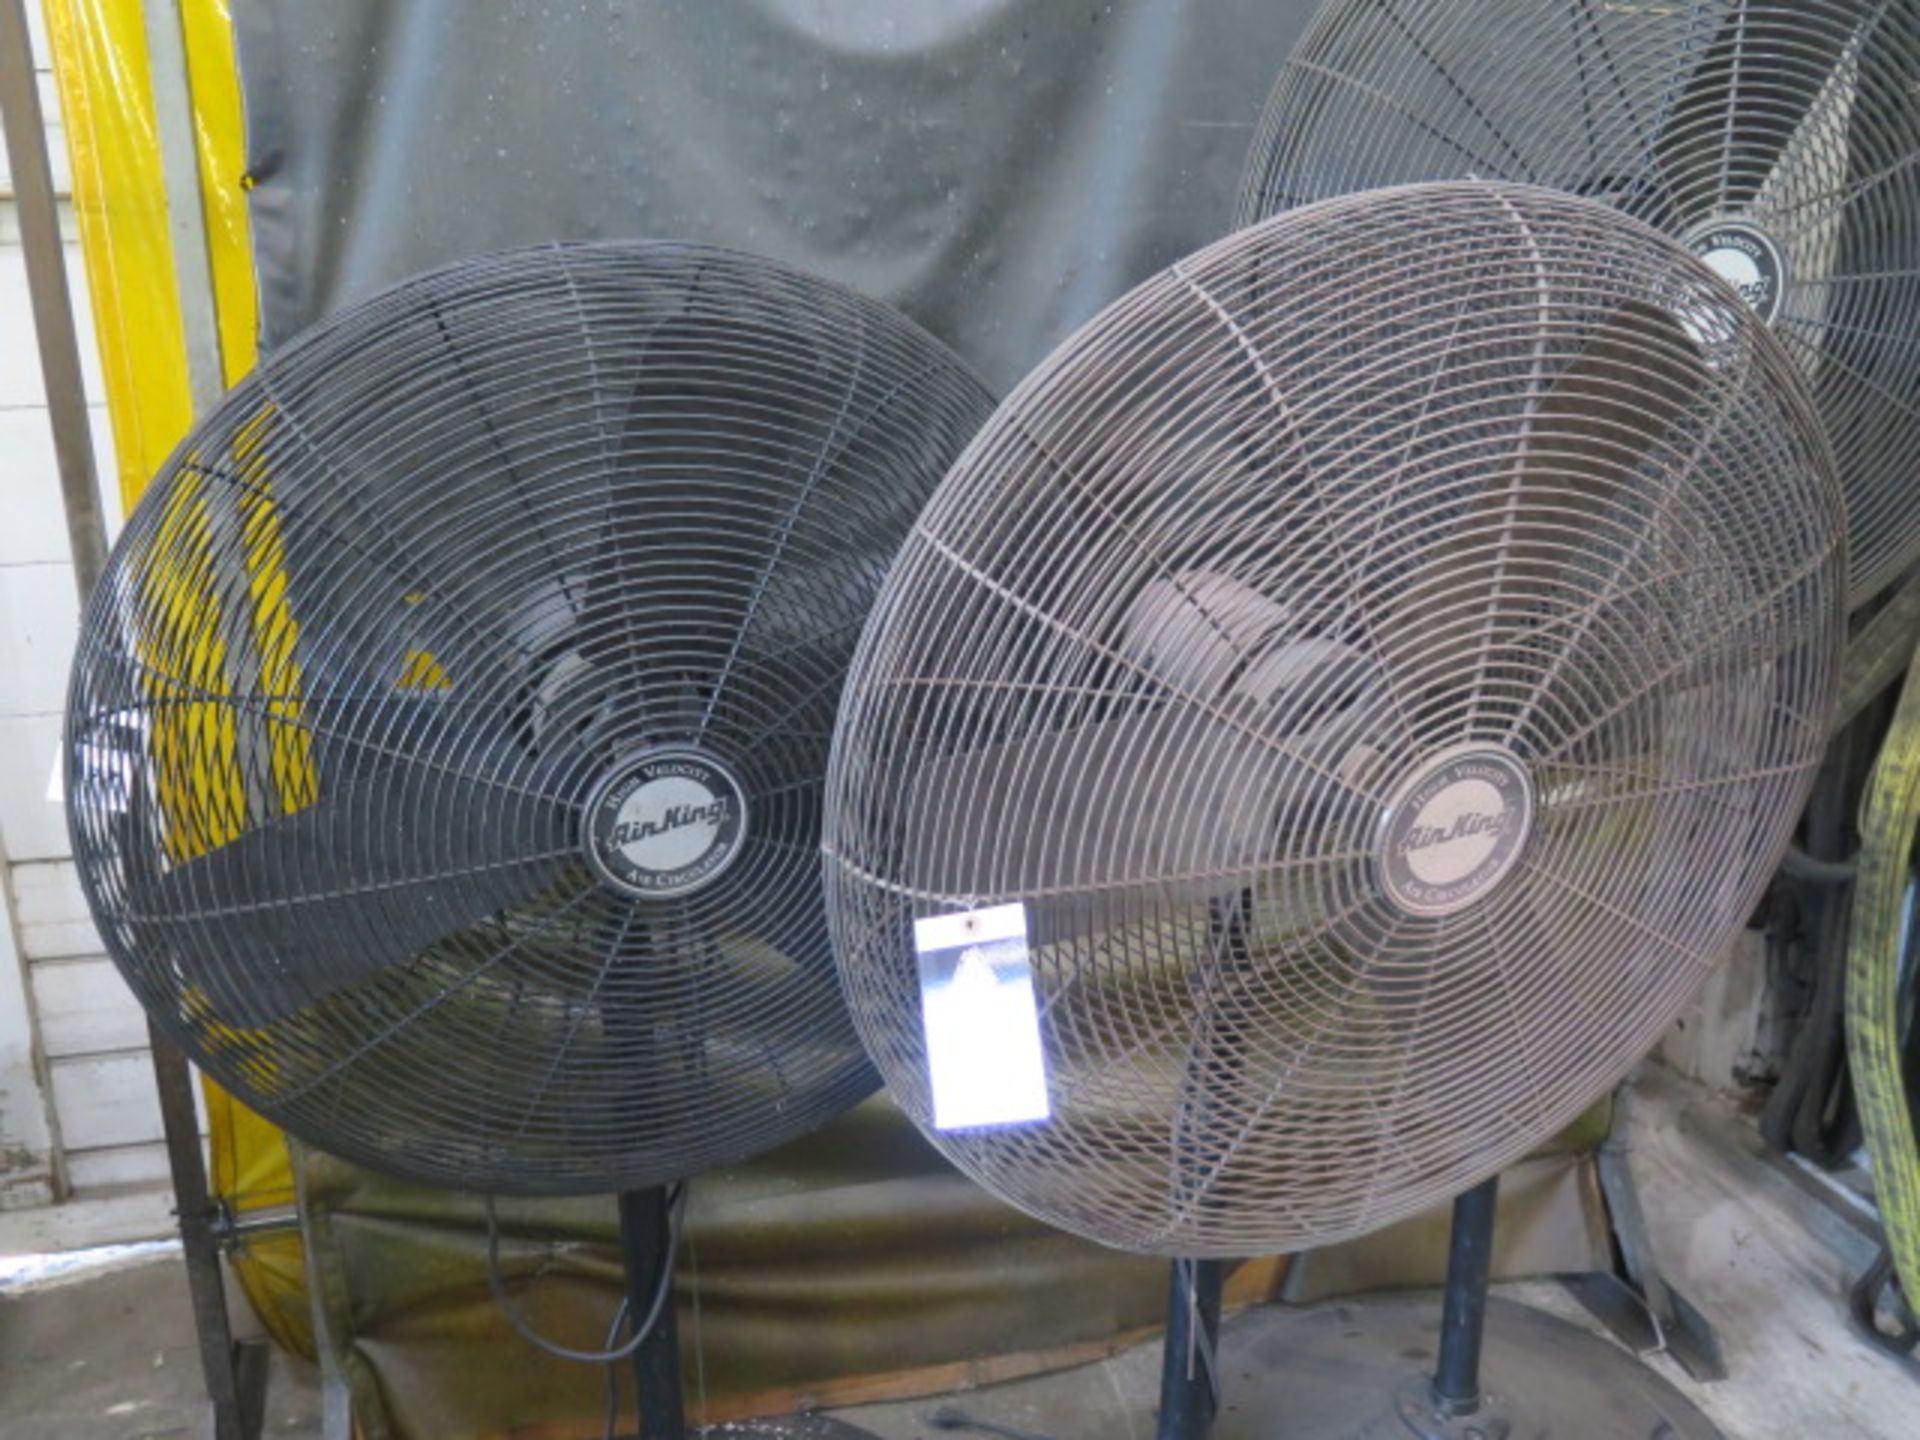 Shop Fans (3) (SOLD AS-IS - NO WARRANTY) - Image 3 of 4